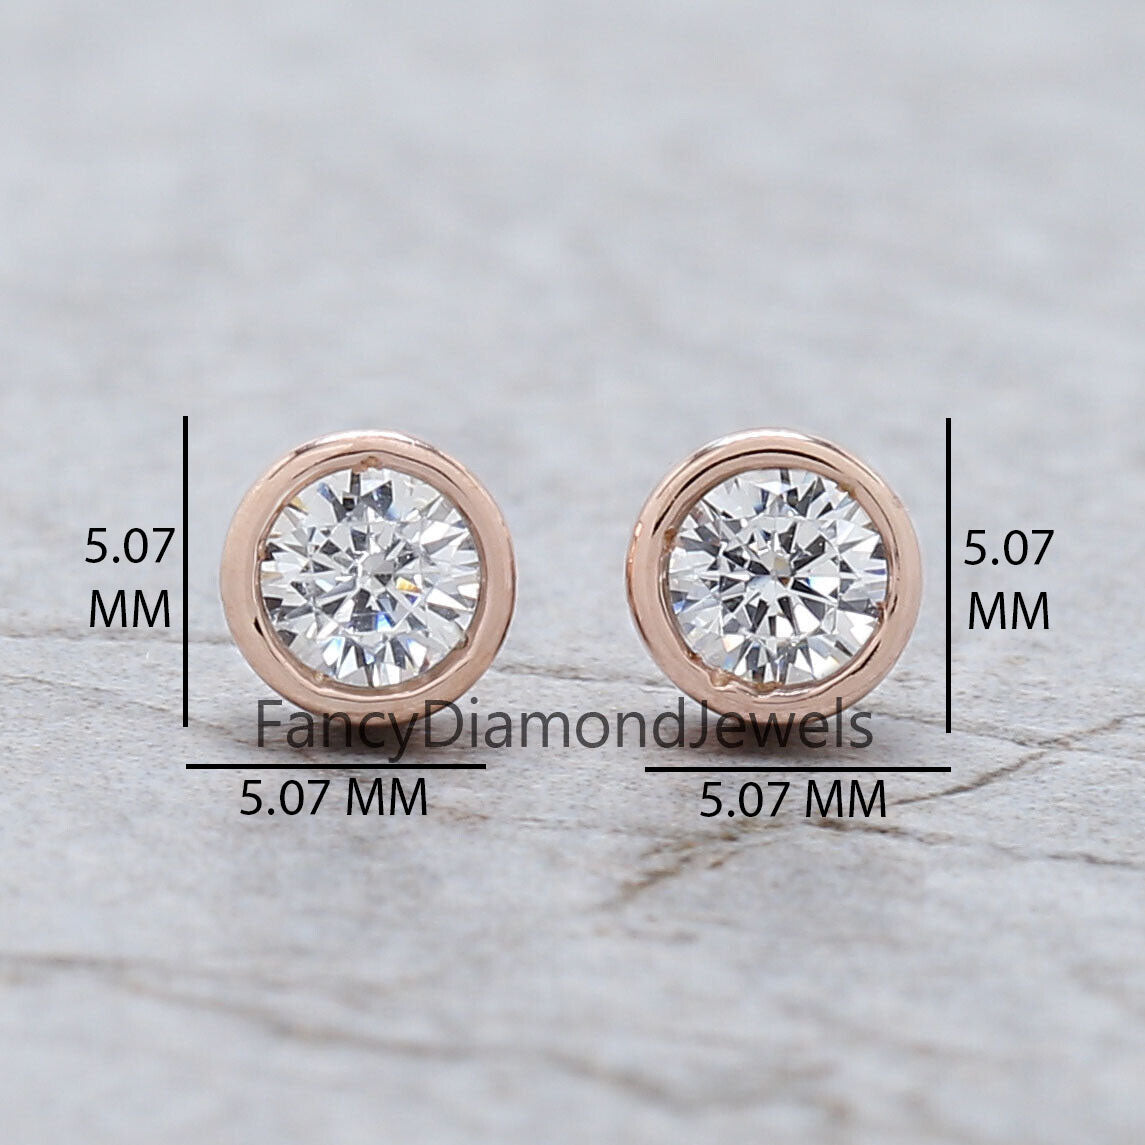 Round White Color Diamond Earring Engagement Wedding Gift Earring 14K Solid Rose White Yellow Gold Earring 0.34 CT KD1000